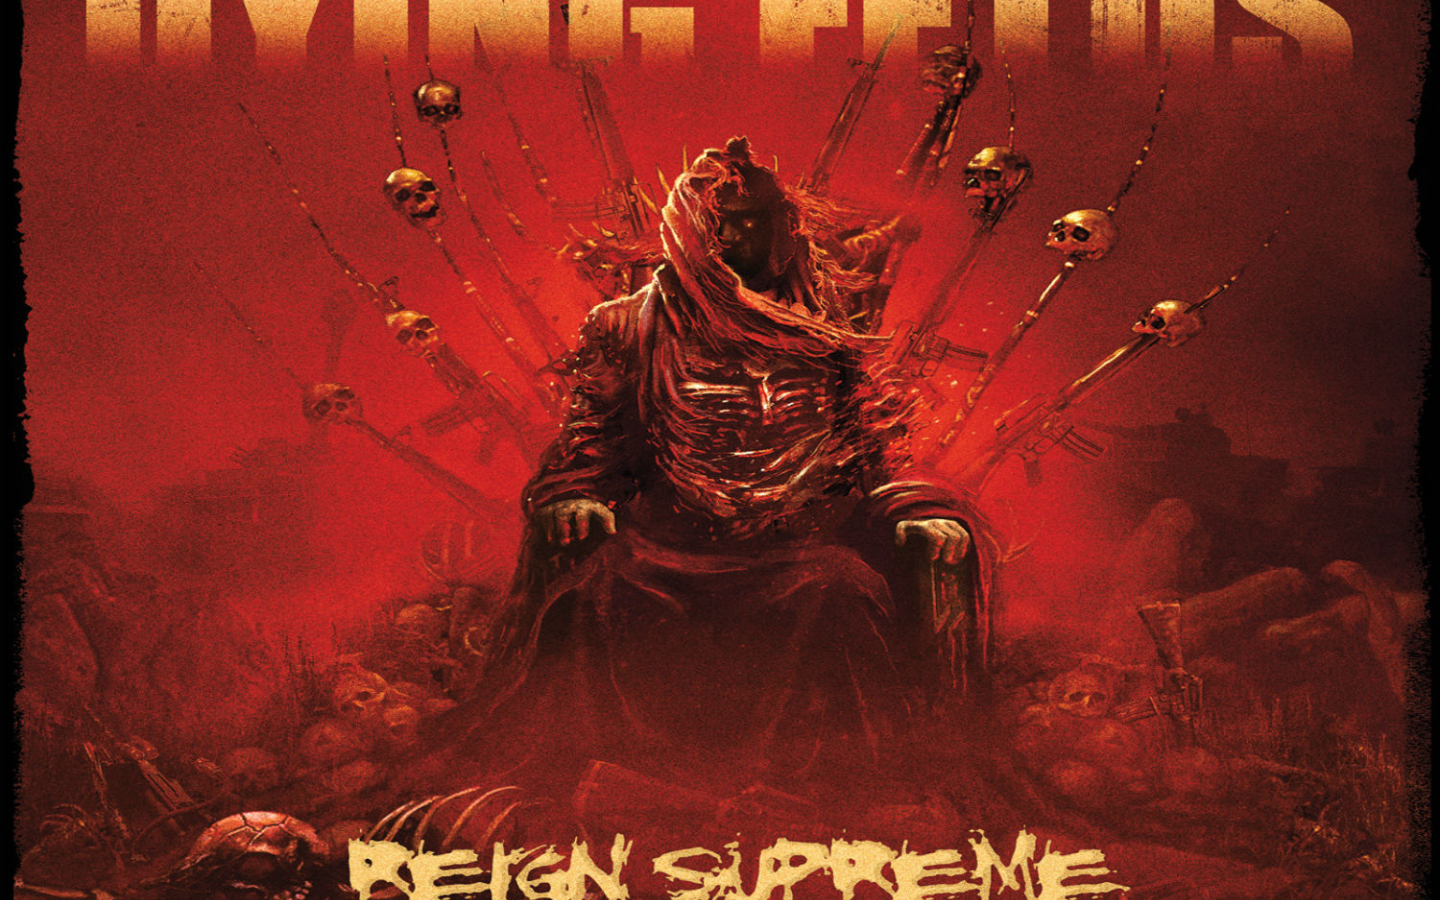 Dying Fetus Wallpapers